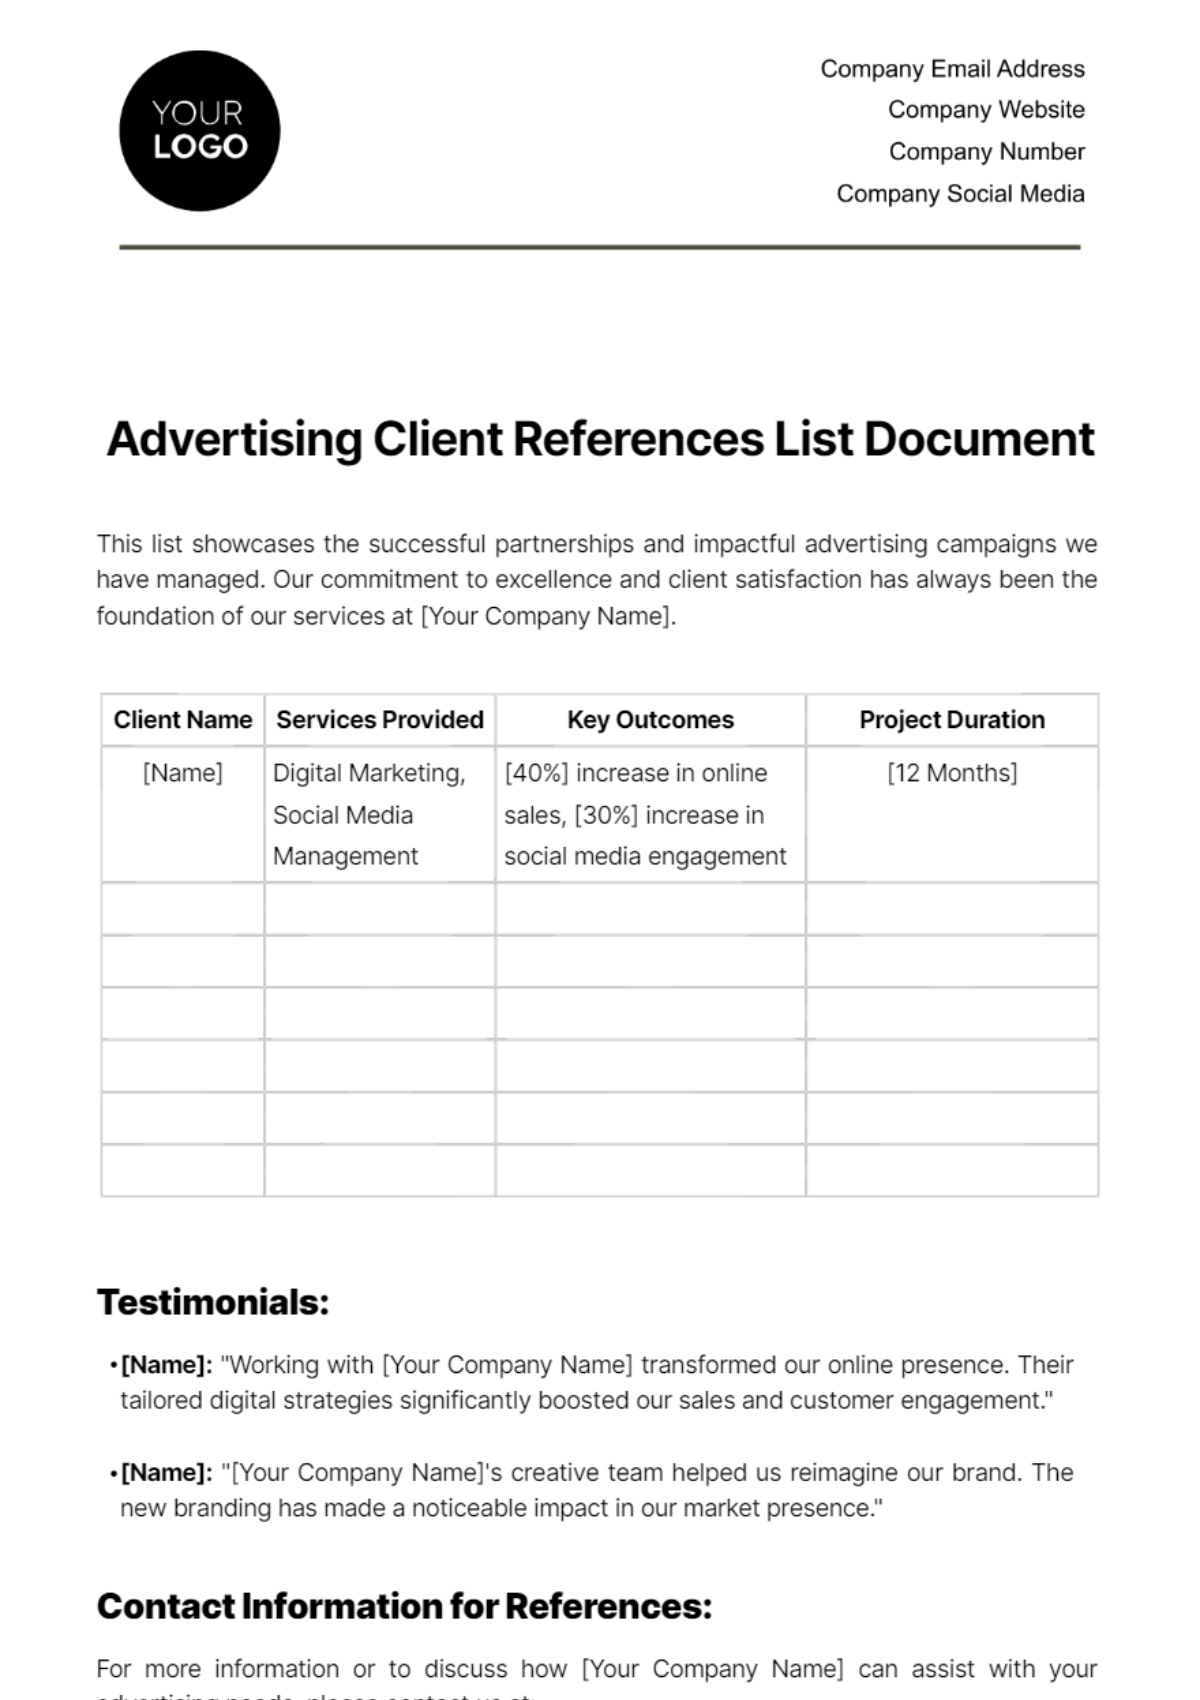 Advertising Client References List Document Template